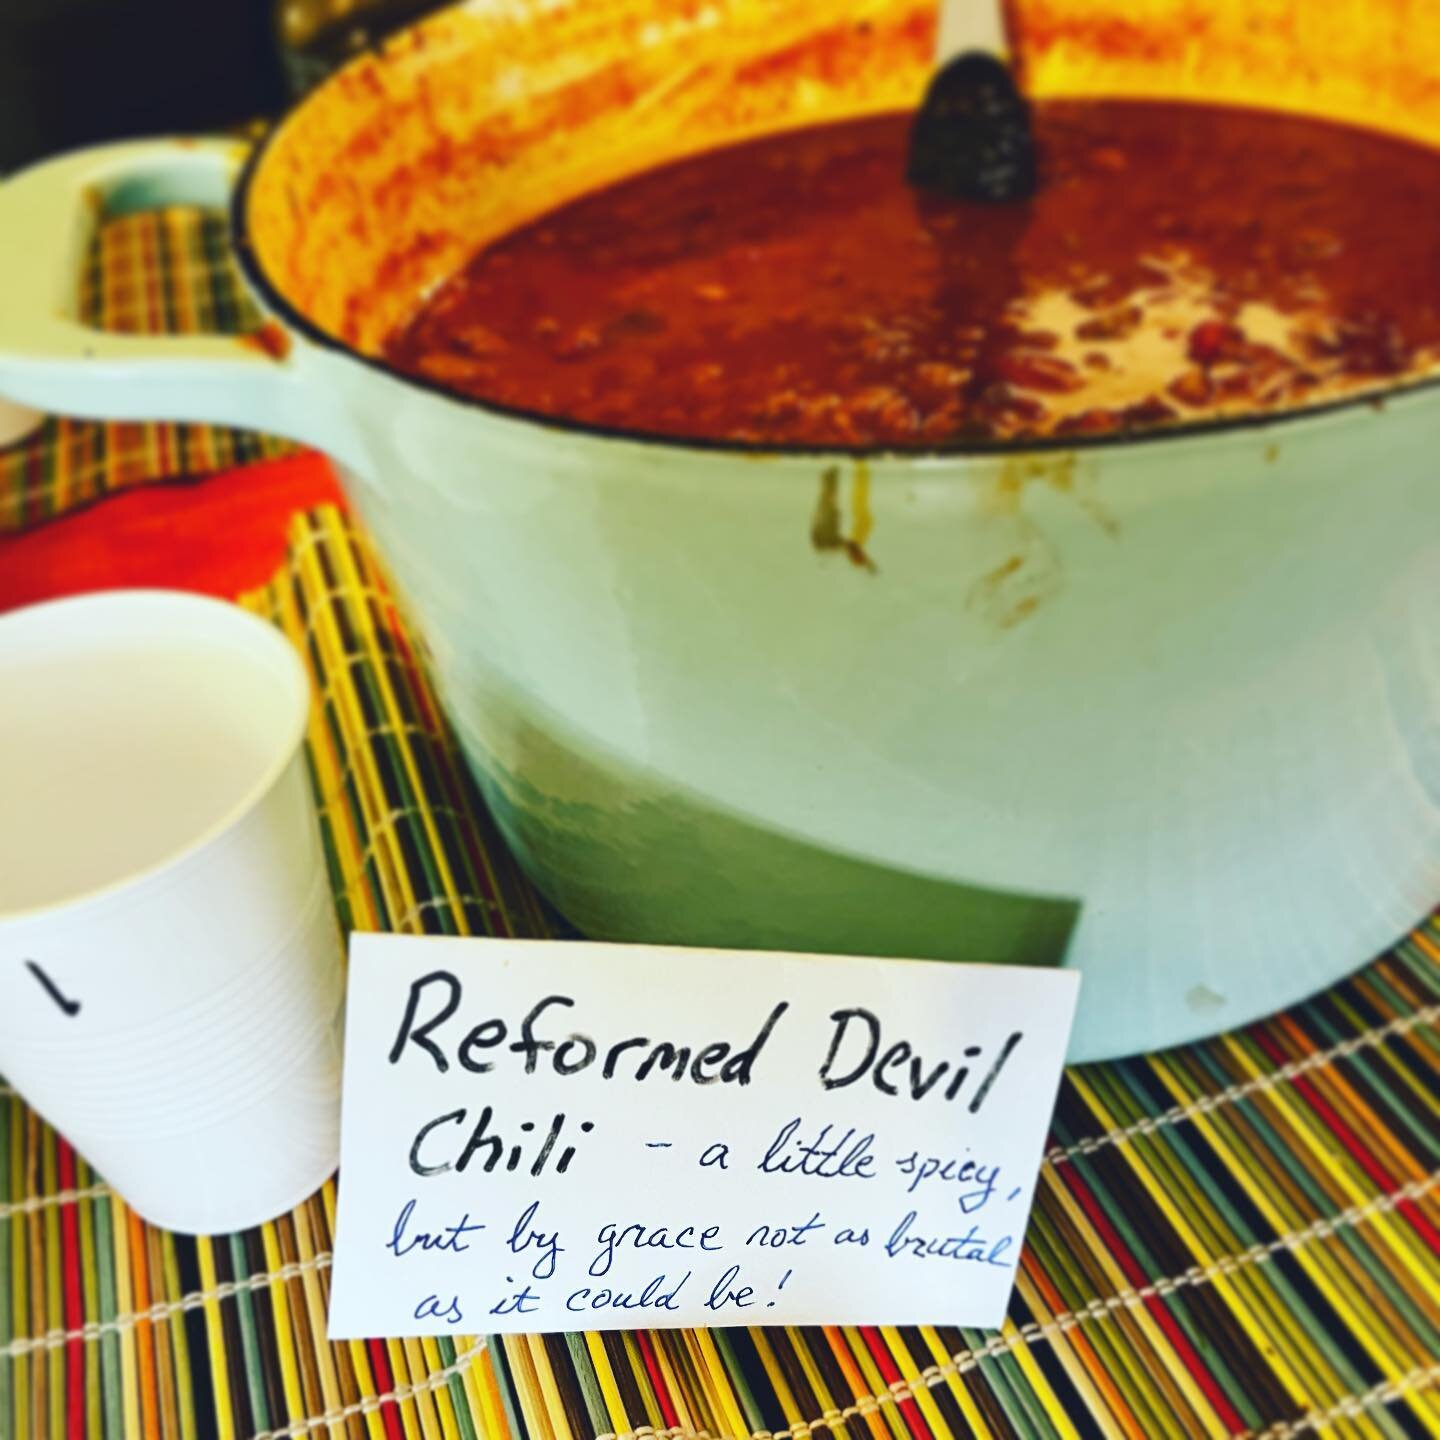 We hosted our annual church chili cook-off this year and congratulations are in order to @prof.barth for this outstanding pot of chili which won the top prize for 2023! 

The GCC chili cook-off is a fundraiser event to help offset the costs of hostin